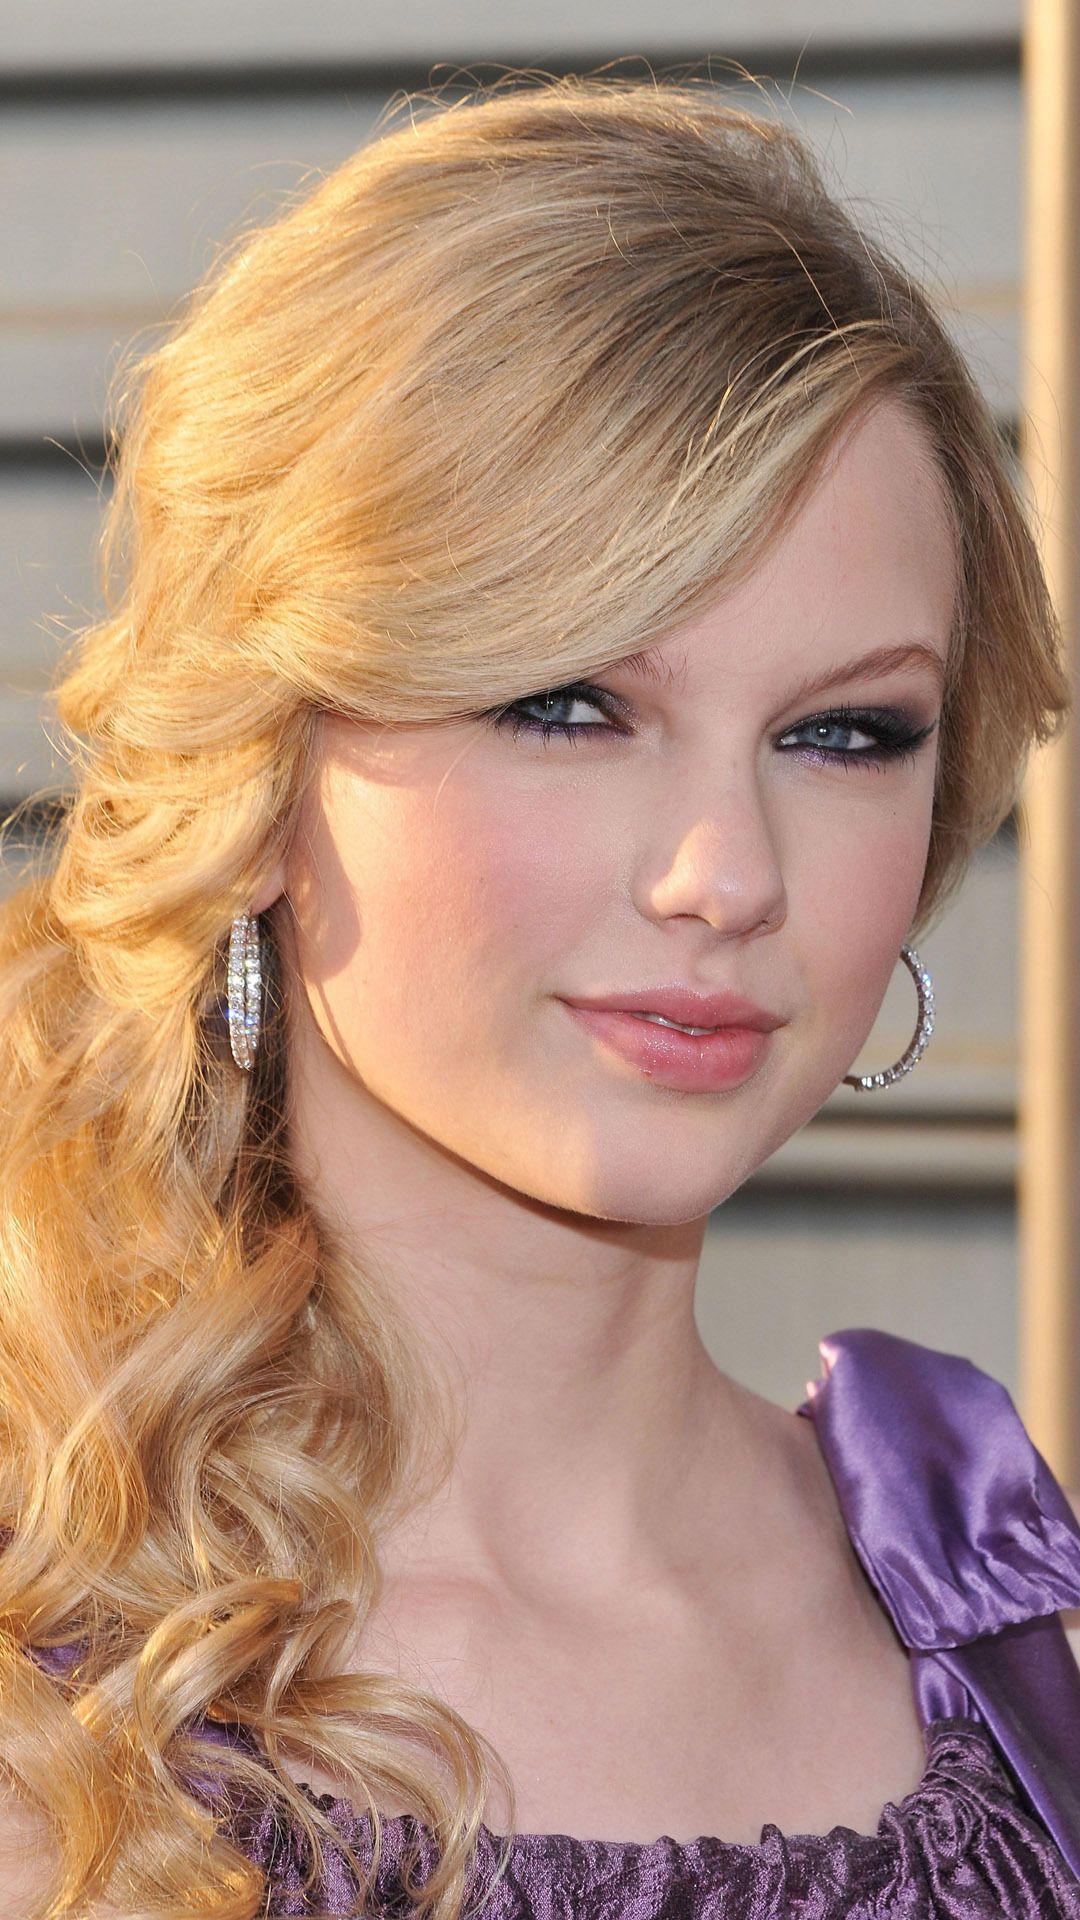 Cute smile of taylor swift iphone 6 high definition wallpaper